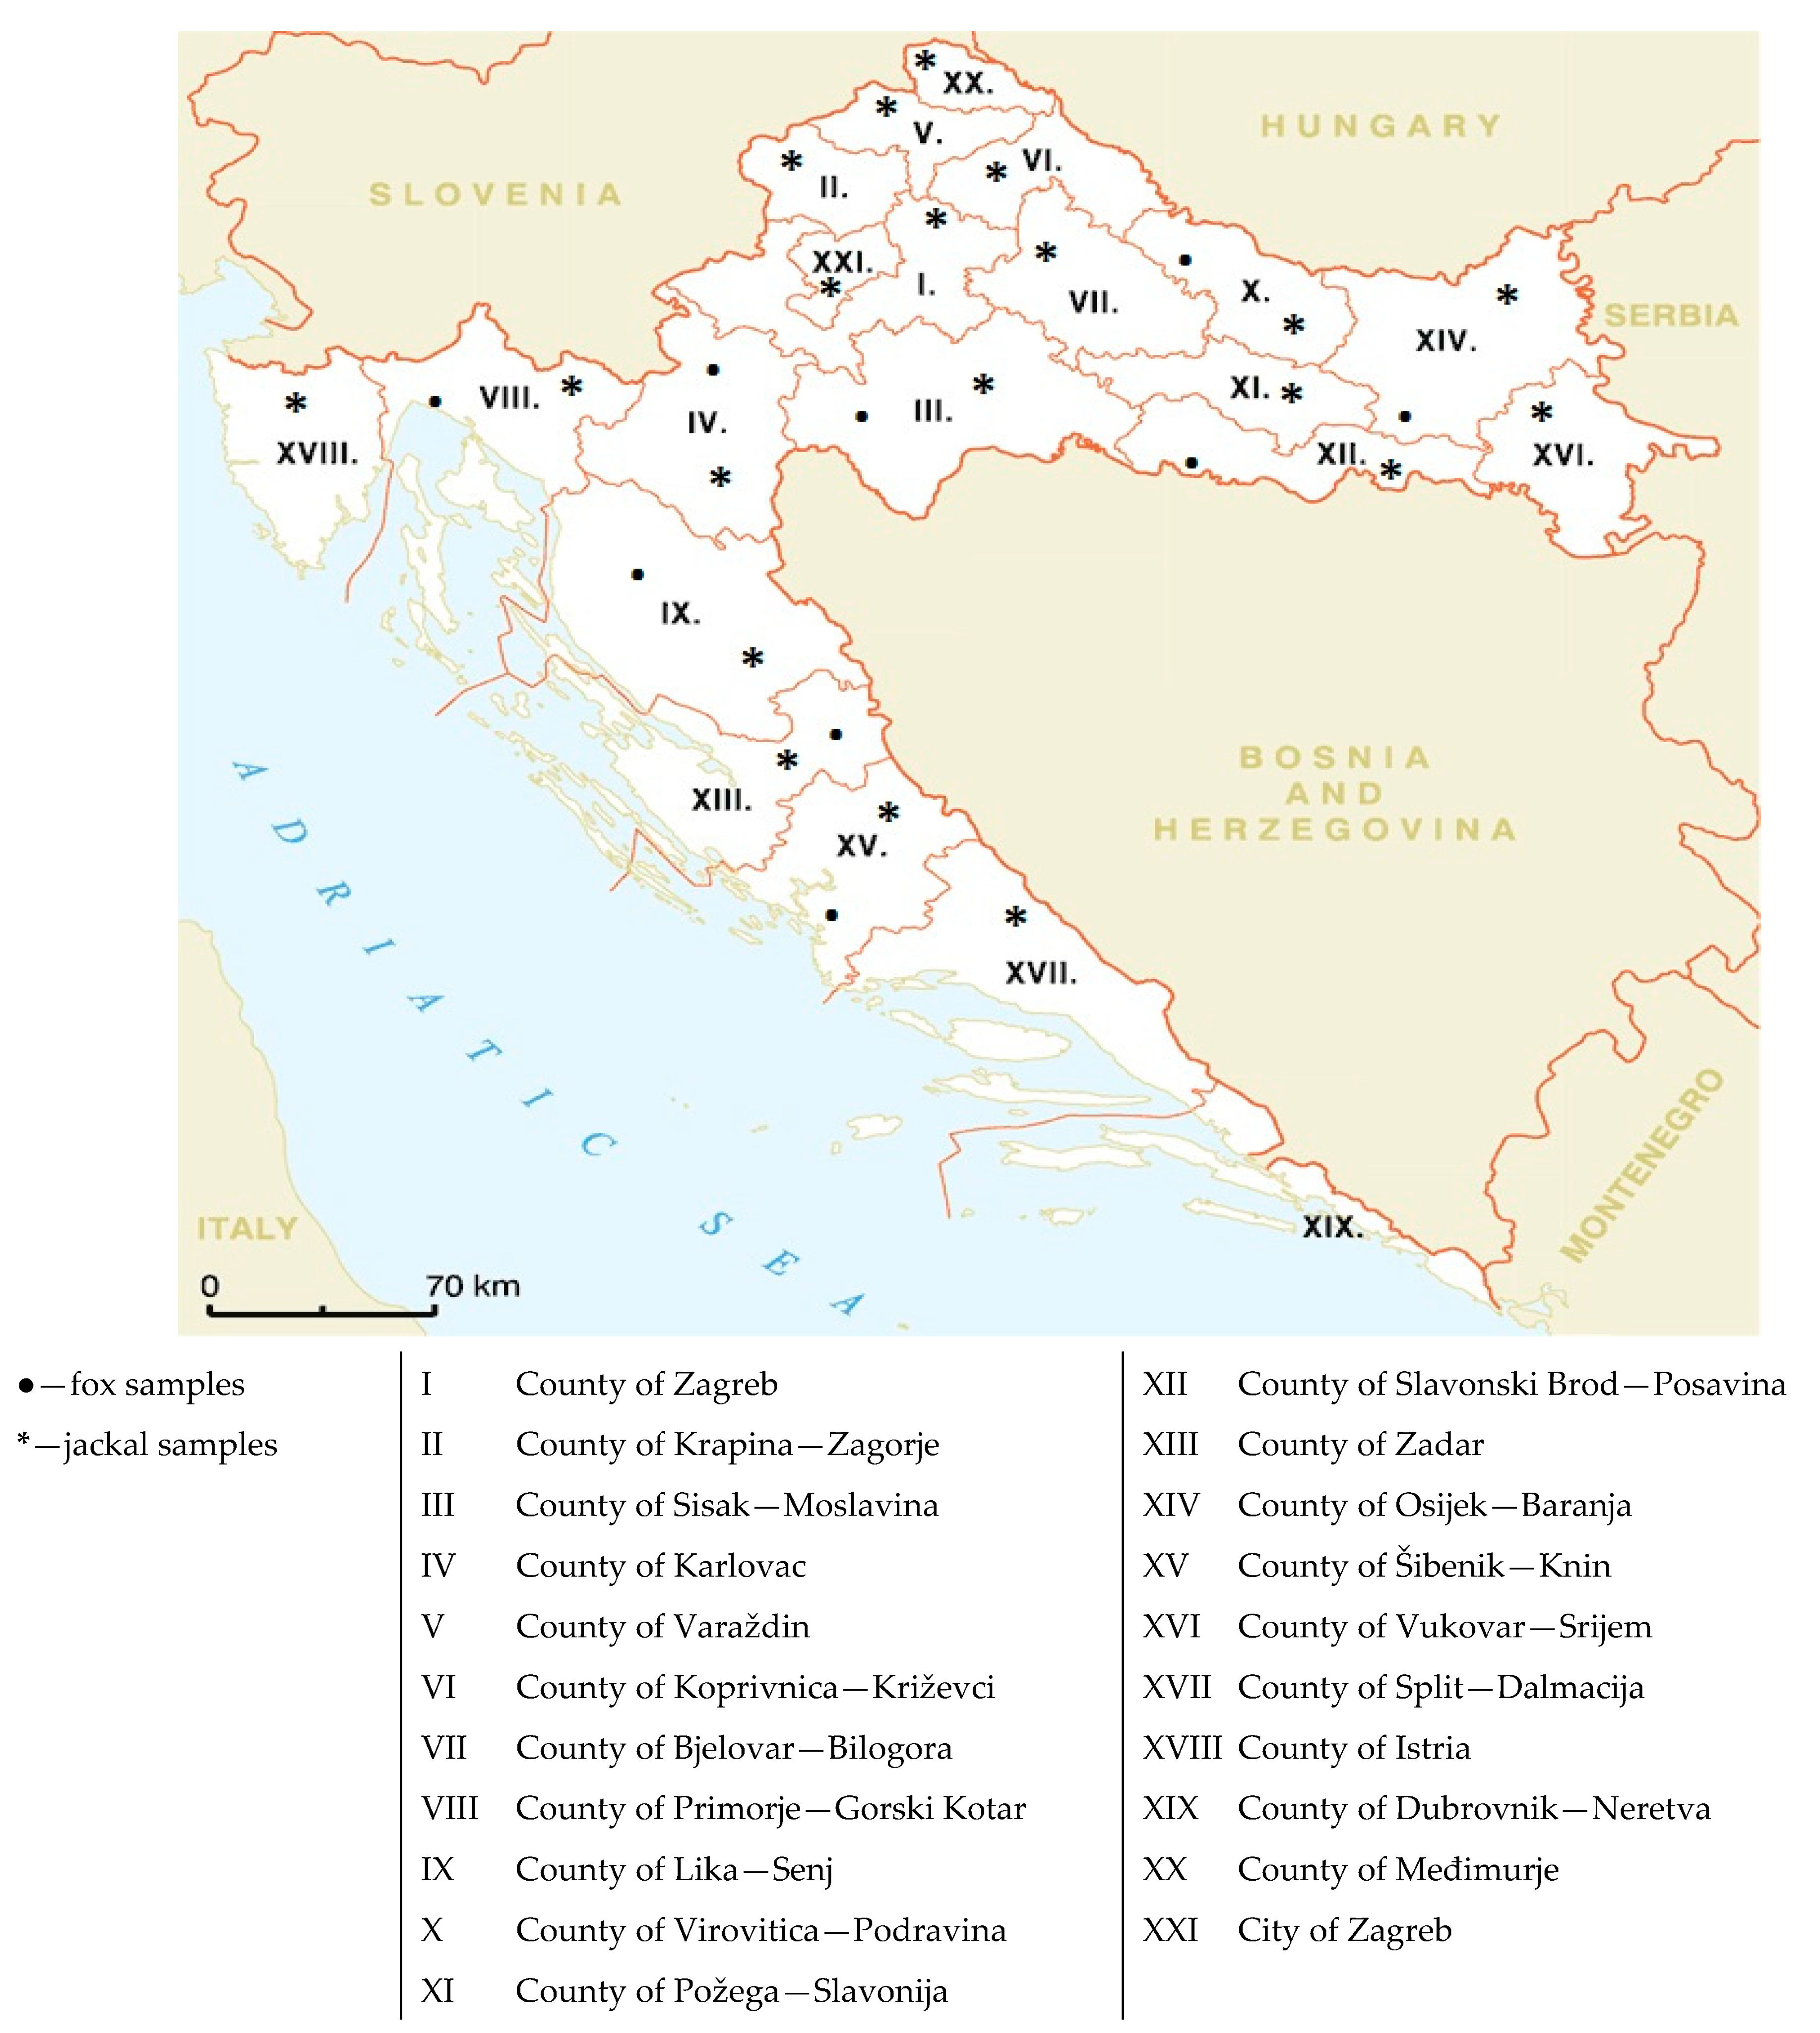 Pathogens | Free Full-Text | Canine Distemper Virus Infection in the  Free-Living Wild Canines, the Red Fox (Vulpes vulpes) and Jackal (Canis  aureus moreoticus), in Croatia